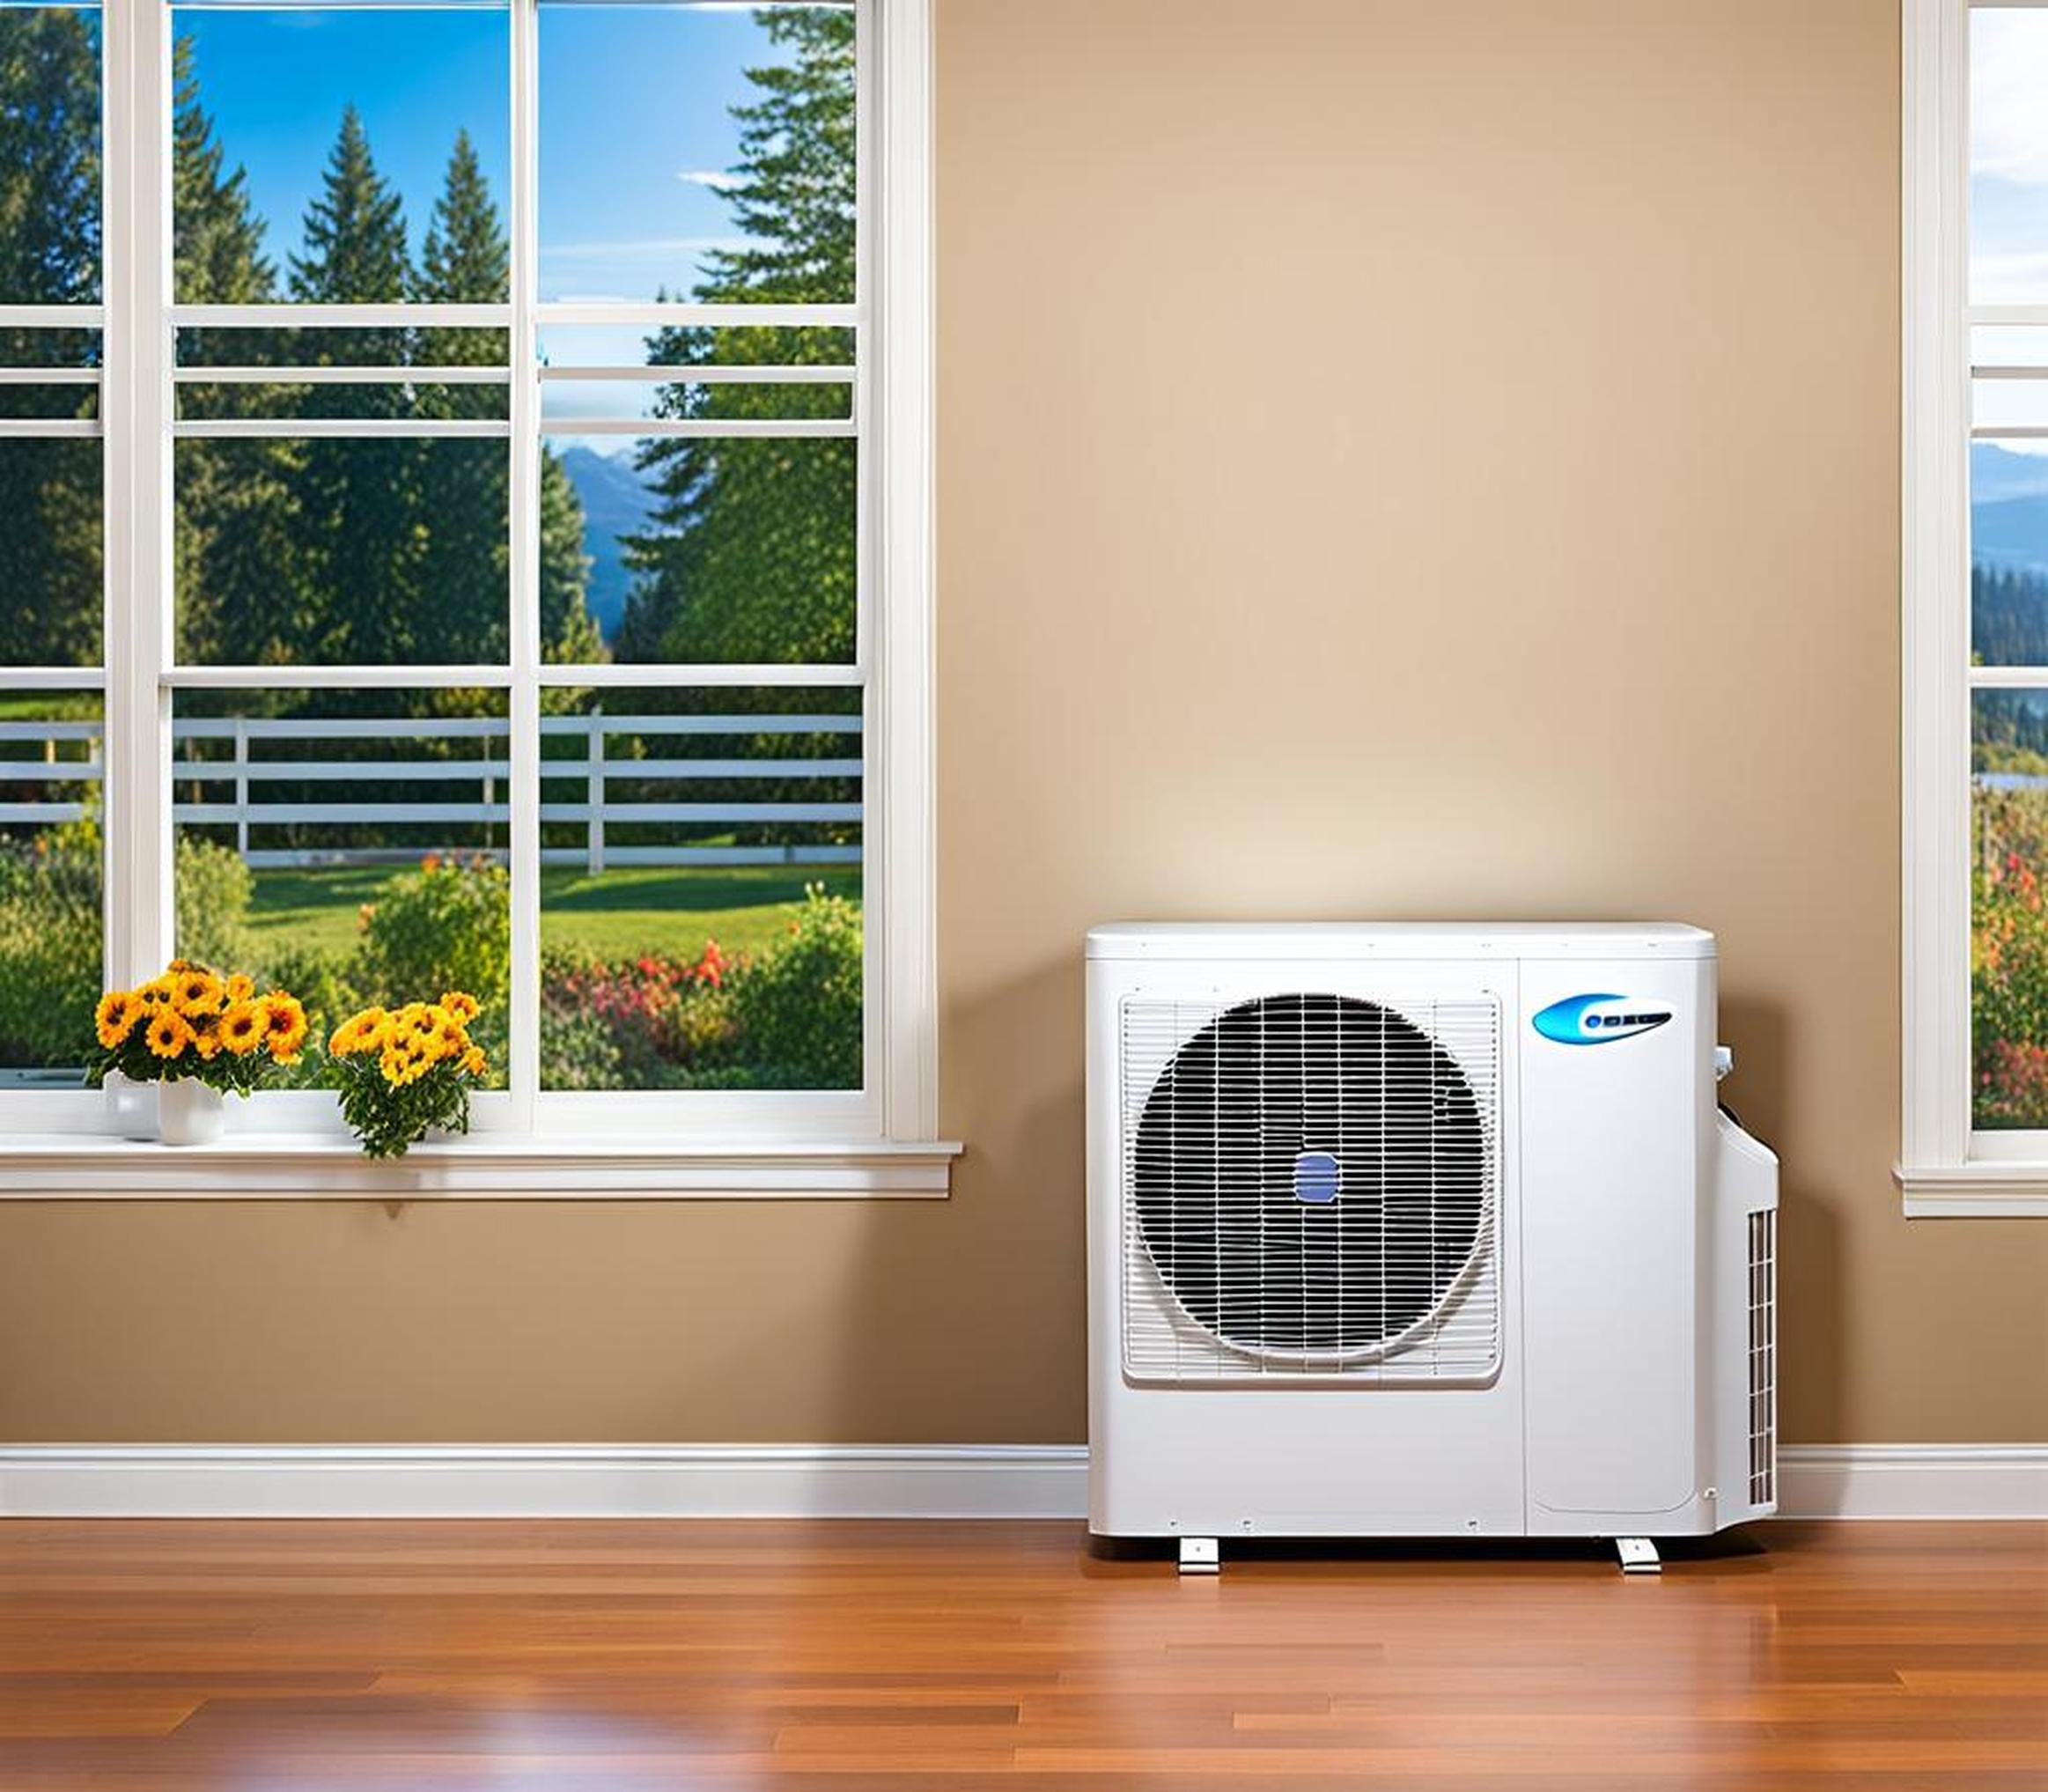 The 5 Best Heat Pump Brands for Efficient Home Heating and Cooling